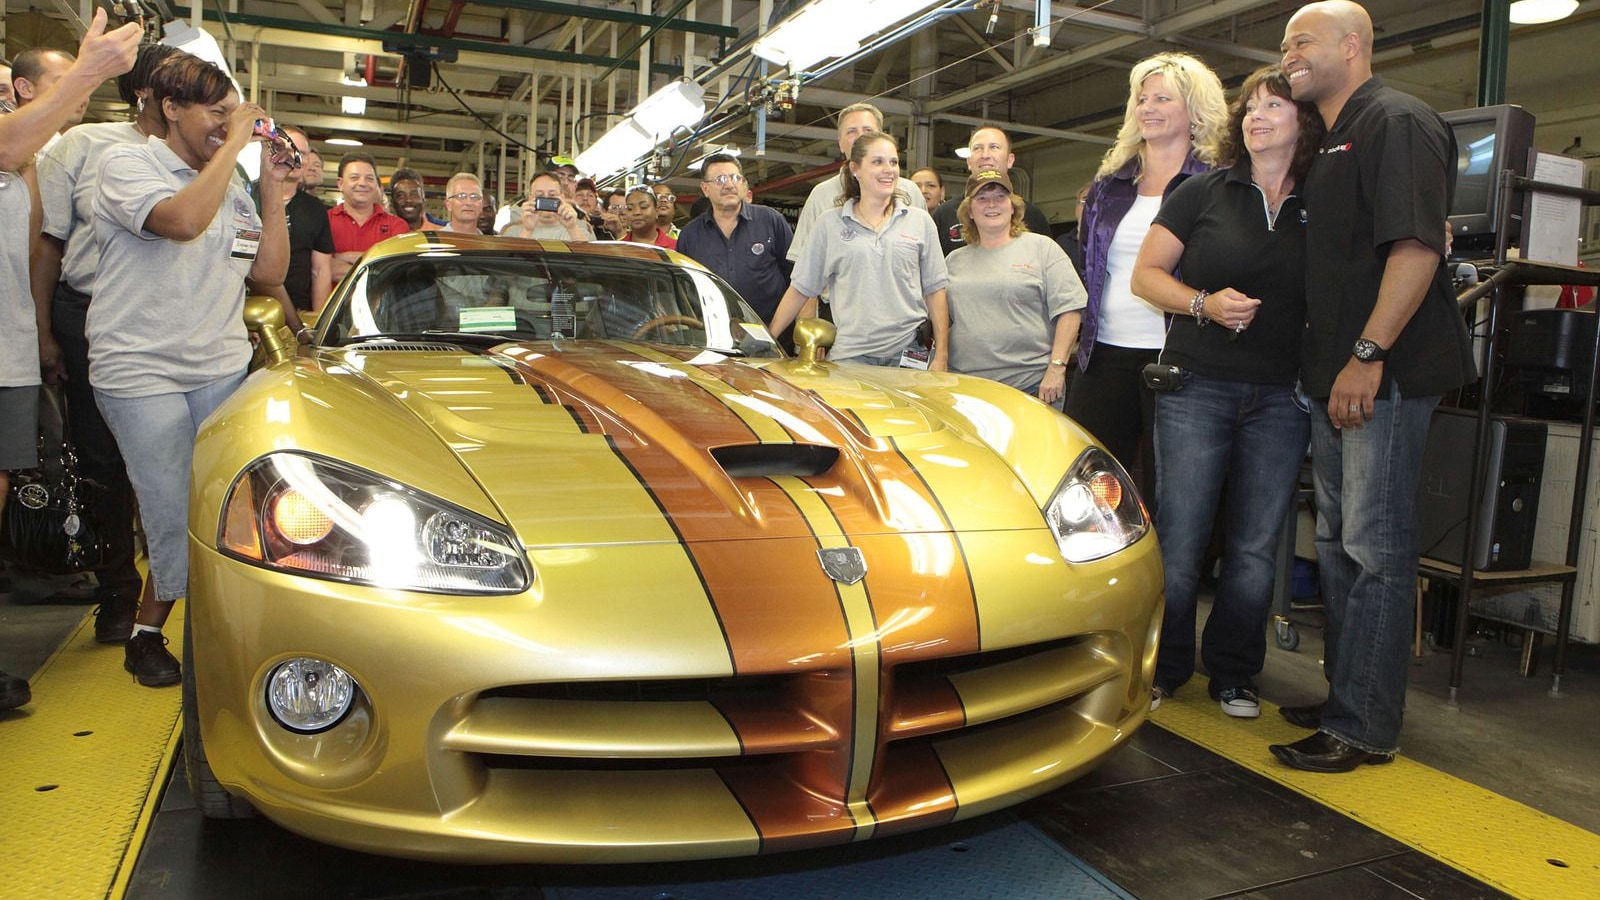 D'Ann Rauh takes delivery of her custom 2010 Dodge Viper 